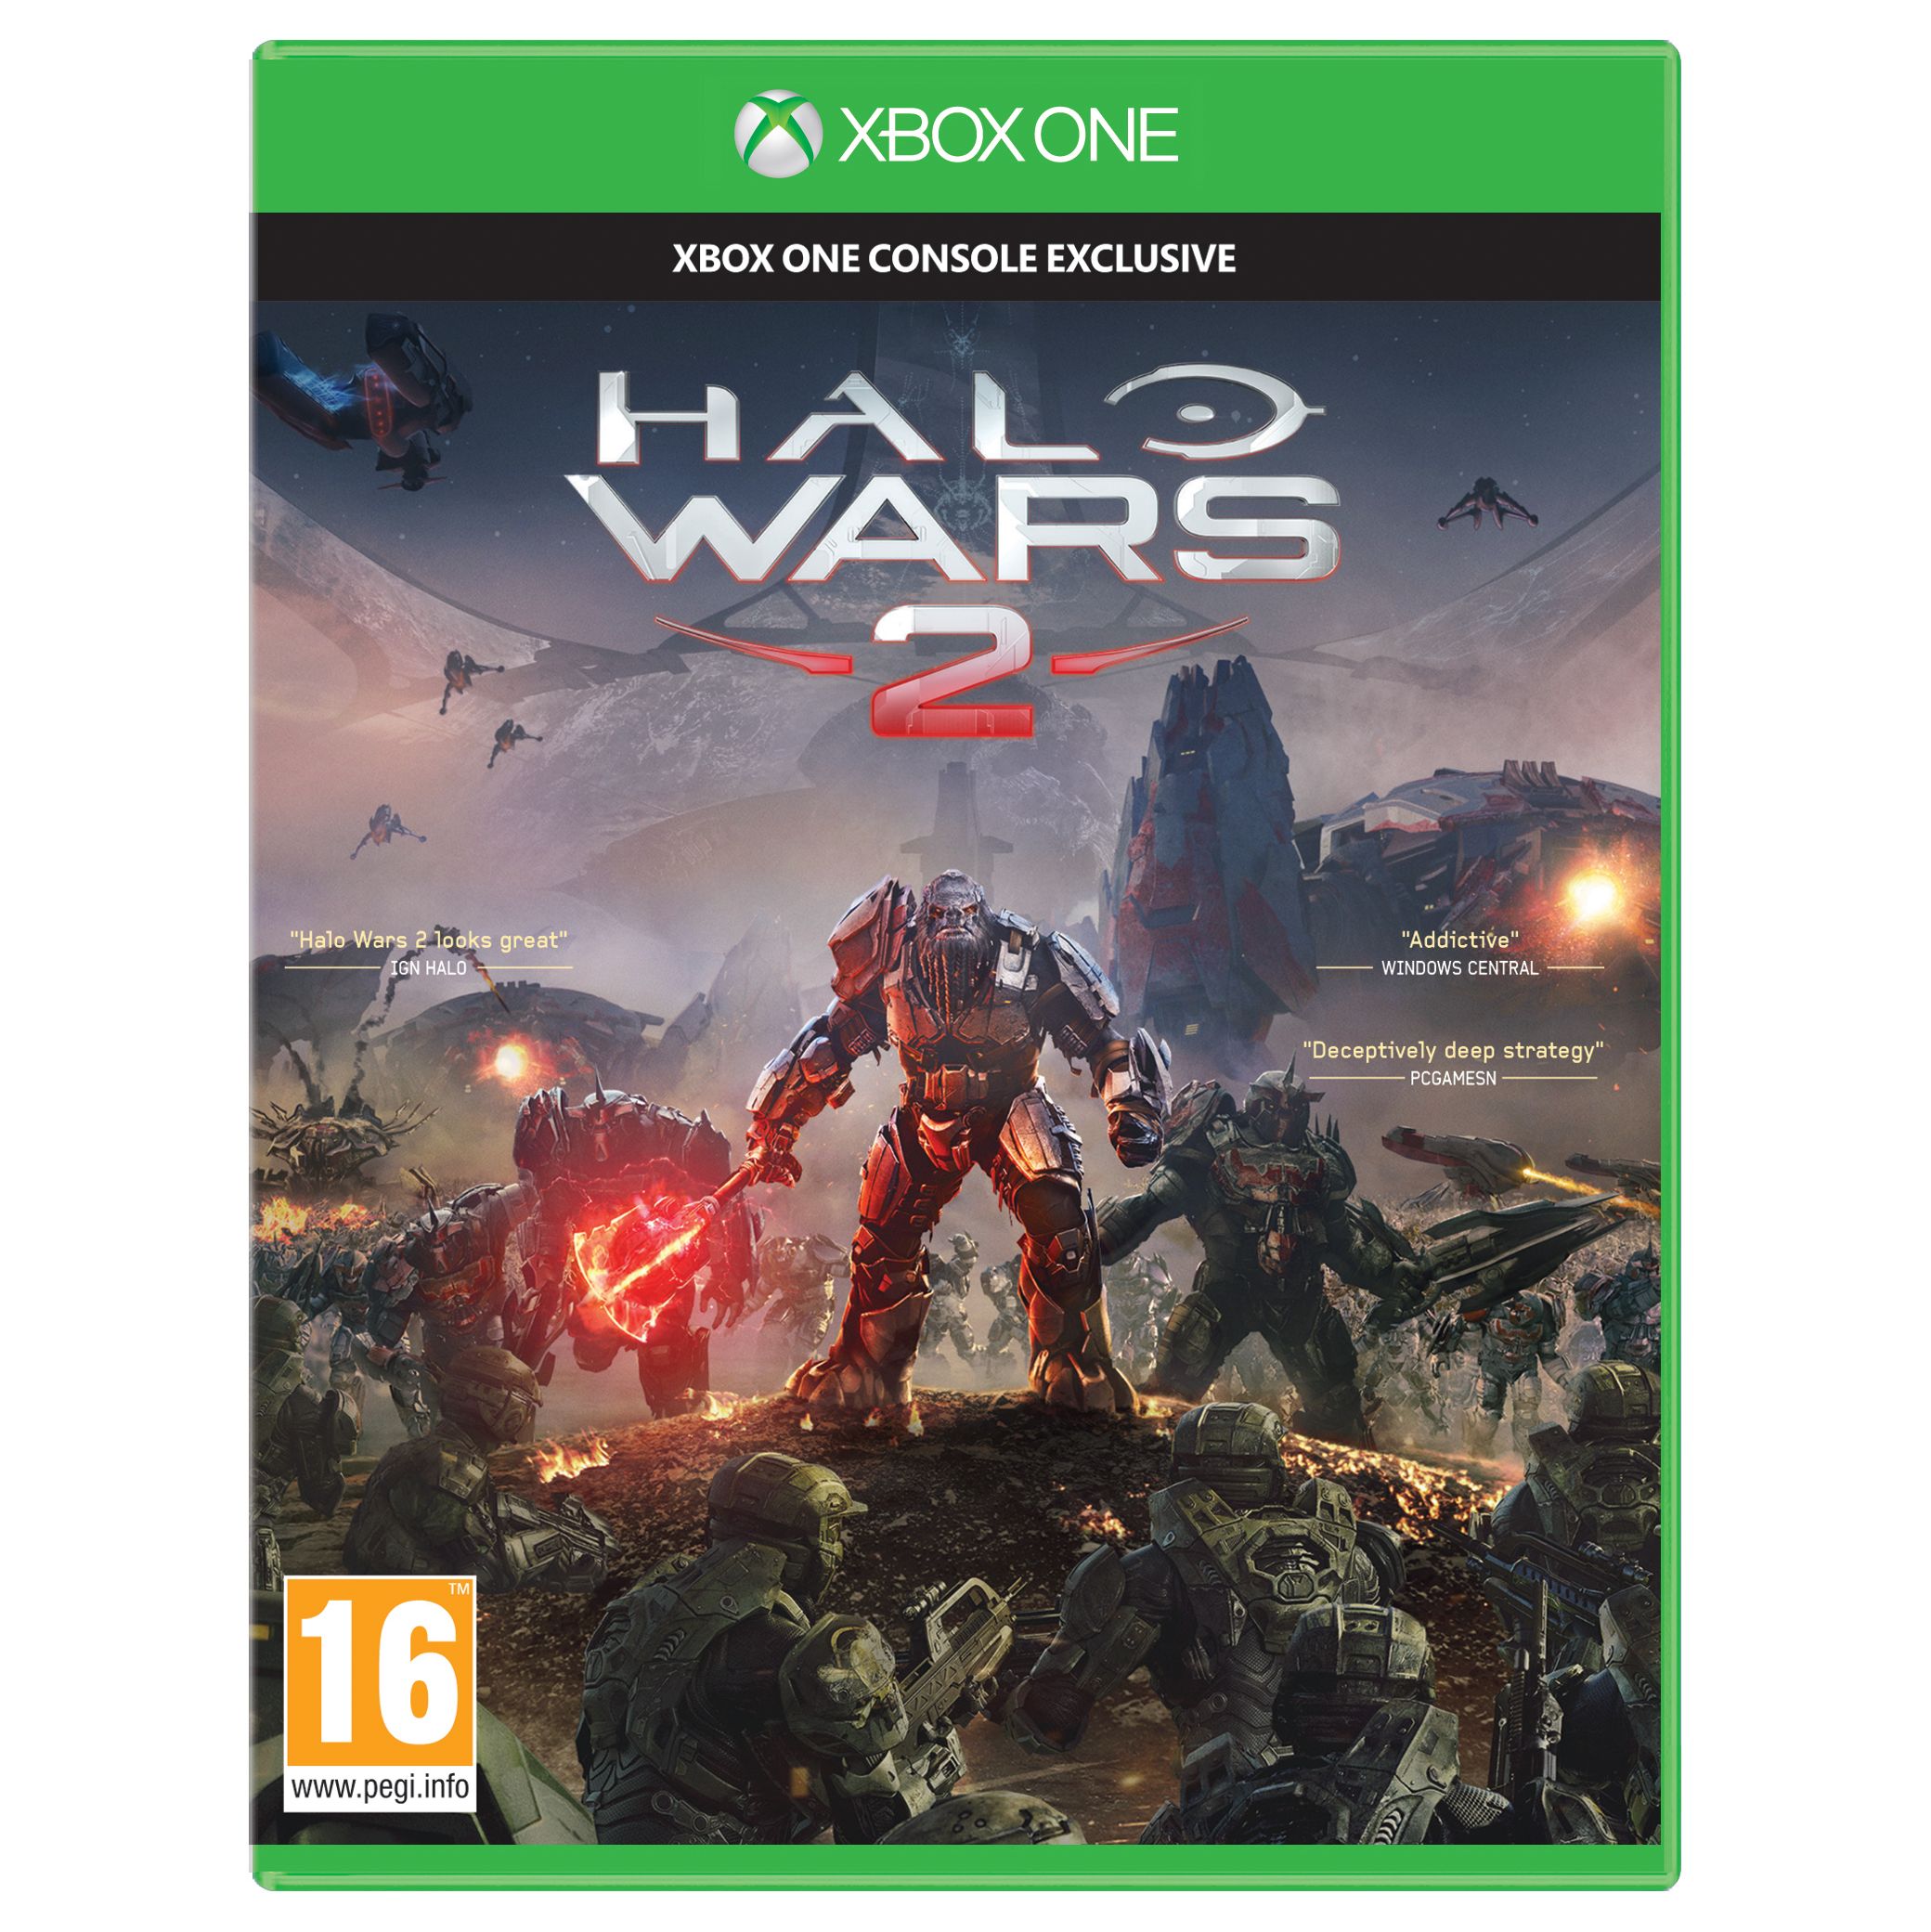 halo-wars-2-xbox-one-at-john-lewis-partners